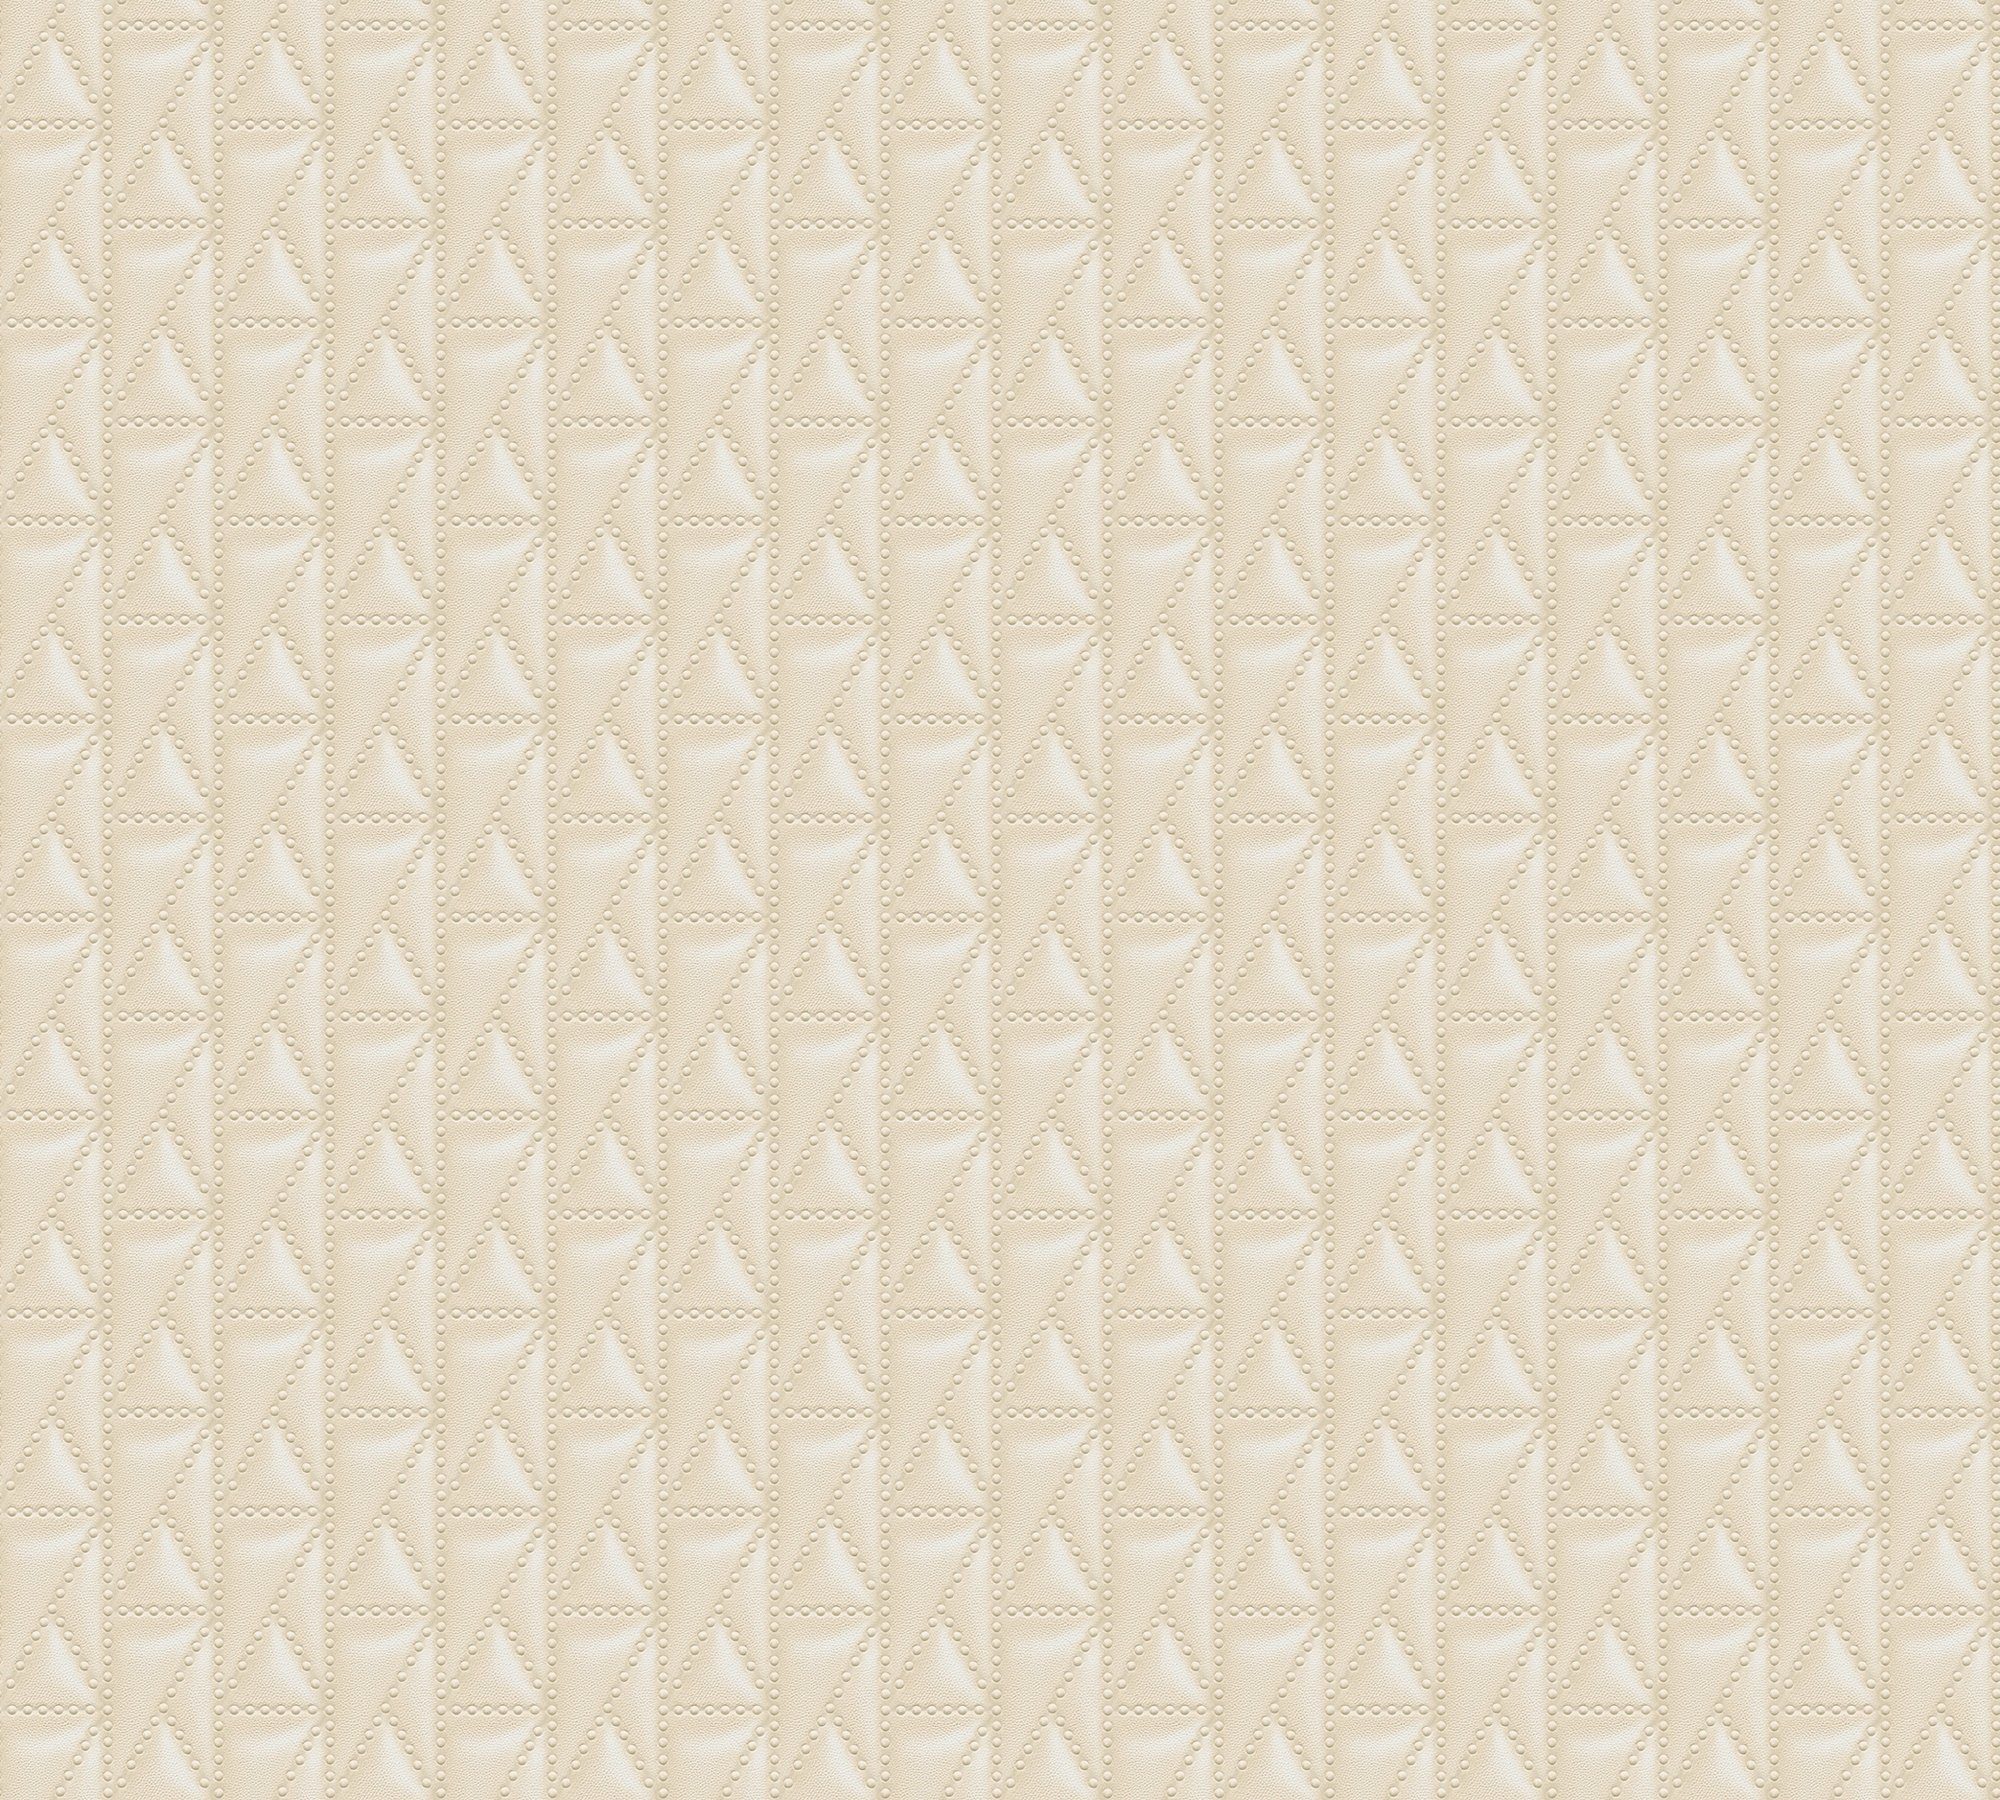 A.S. Création Architects Paper Vliestapete Kuilted, Karl Lagerfeld Tapete Designer beige/creme